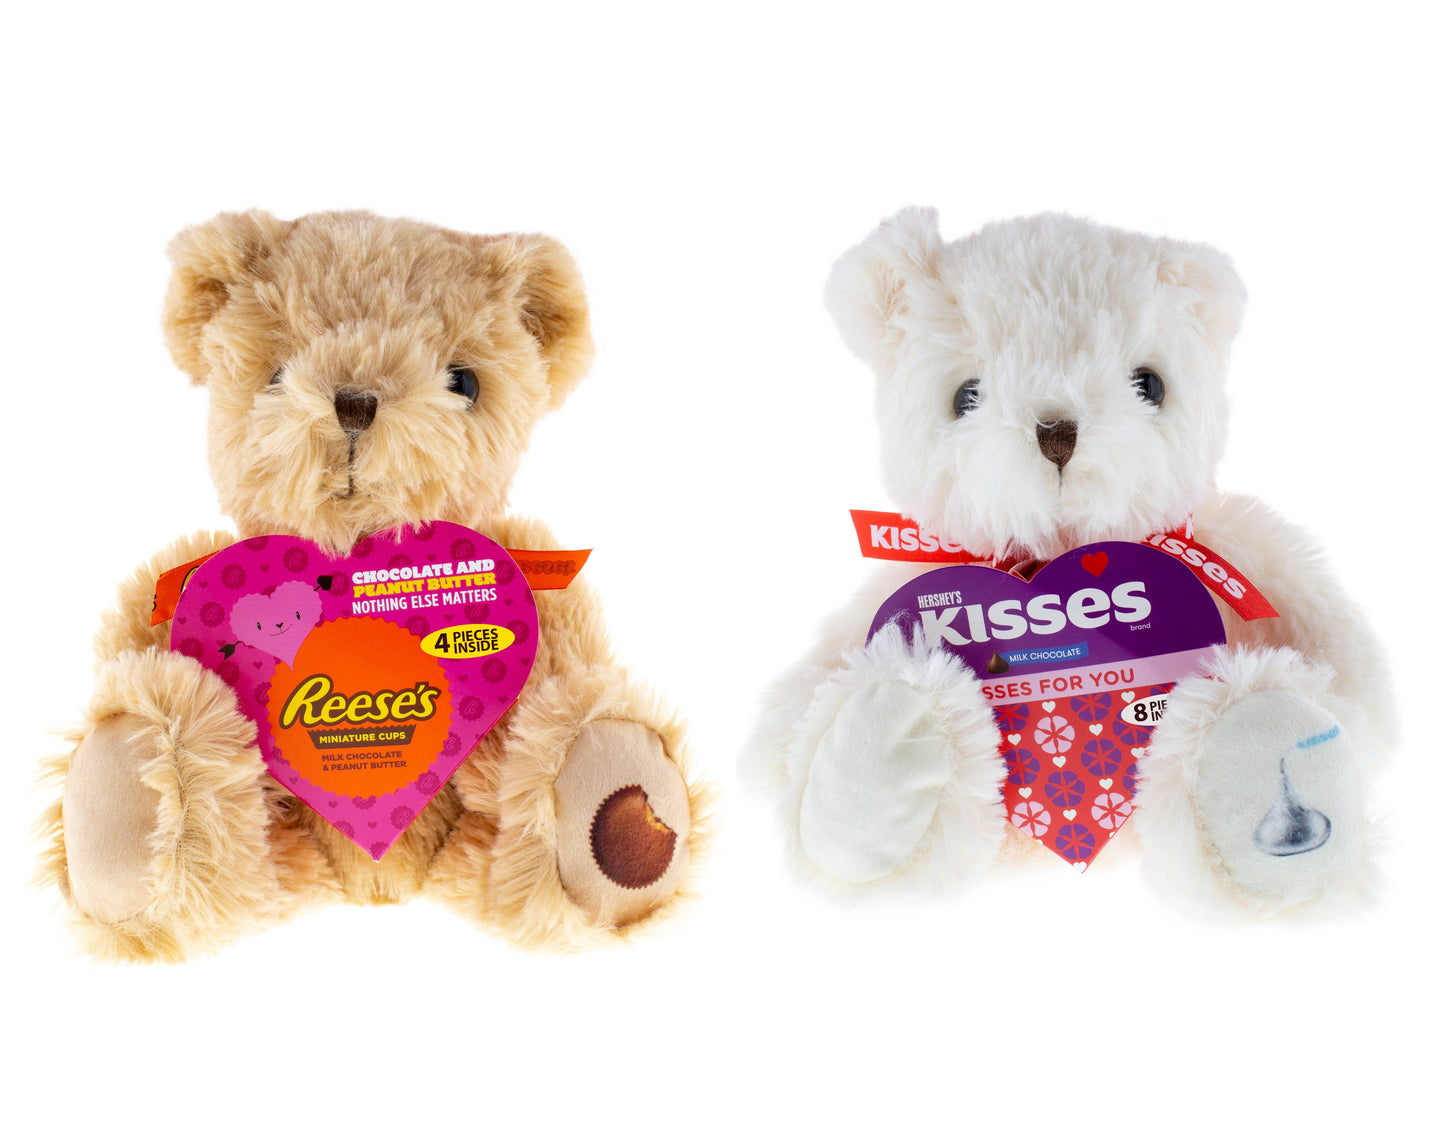 Hershey's Plush Cream and Tan Bear with Candy - Assortment